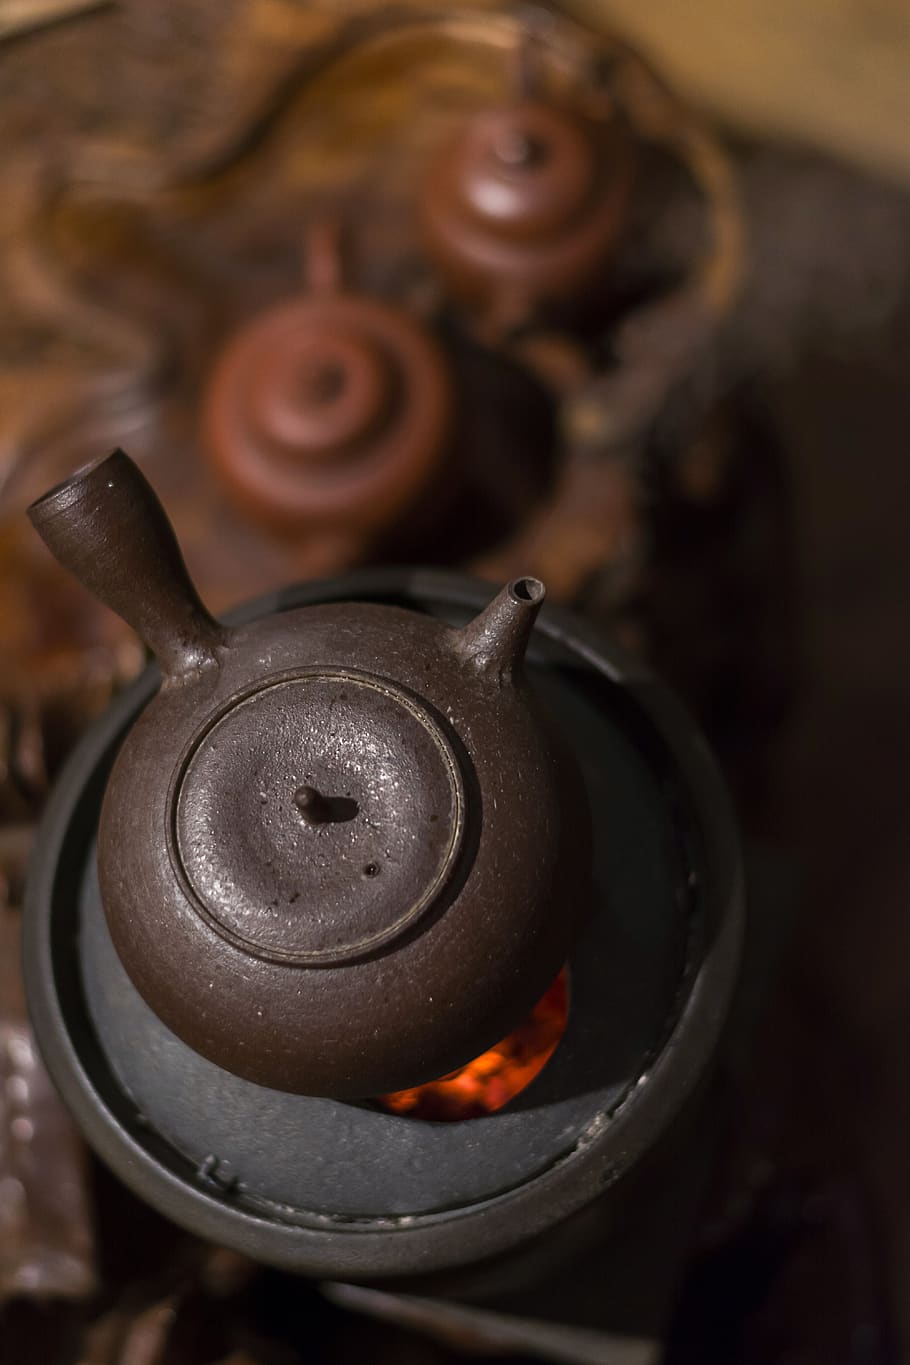 tea, boiling, hot, kettle, tranquility, indoors, stove, focus on foreground, metal, food and drink